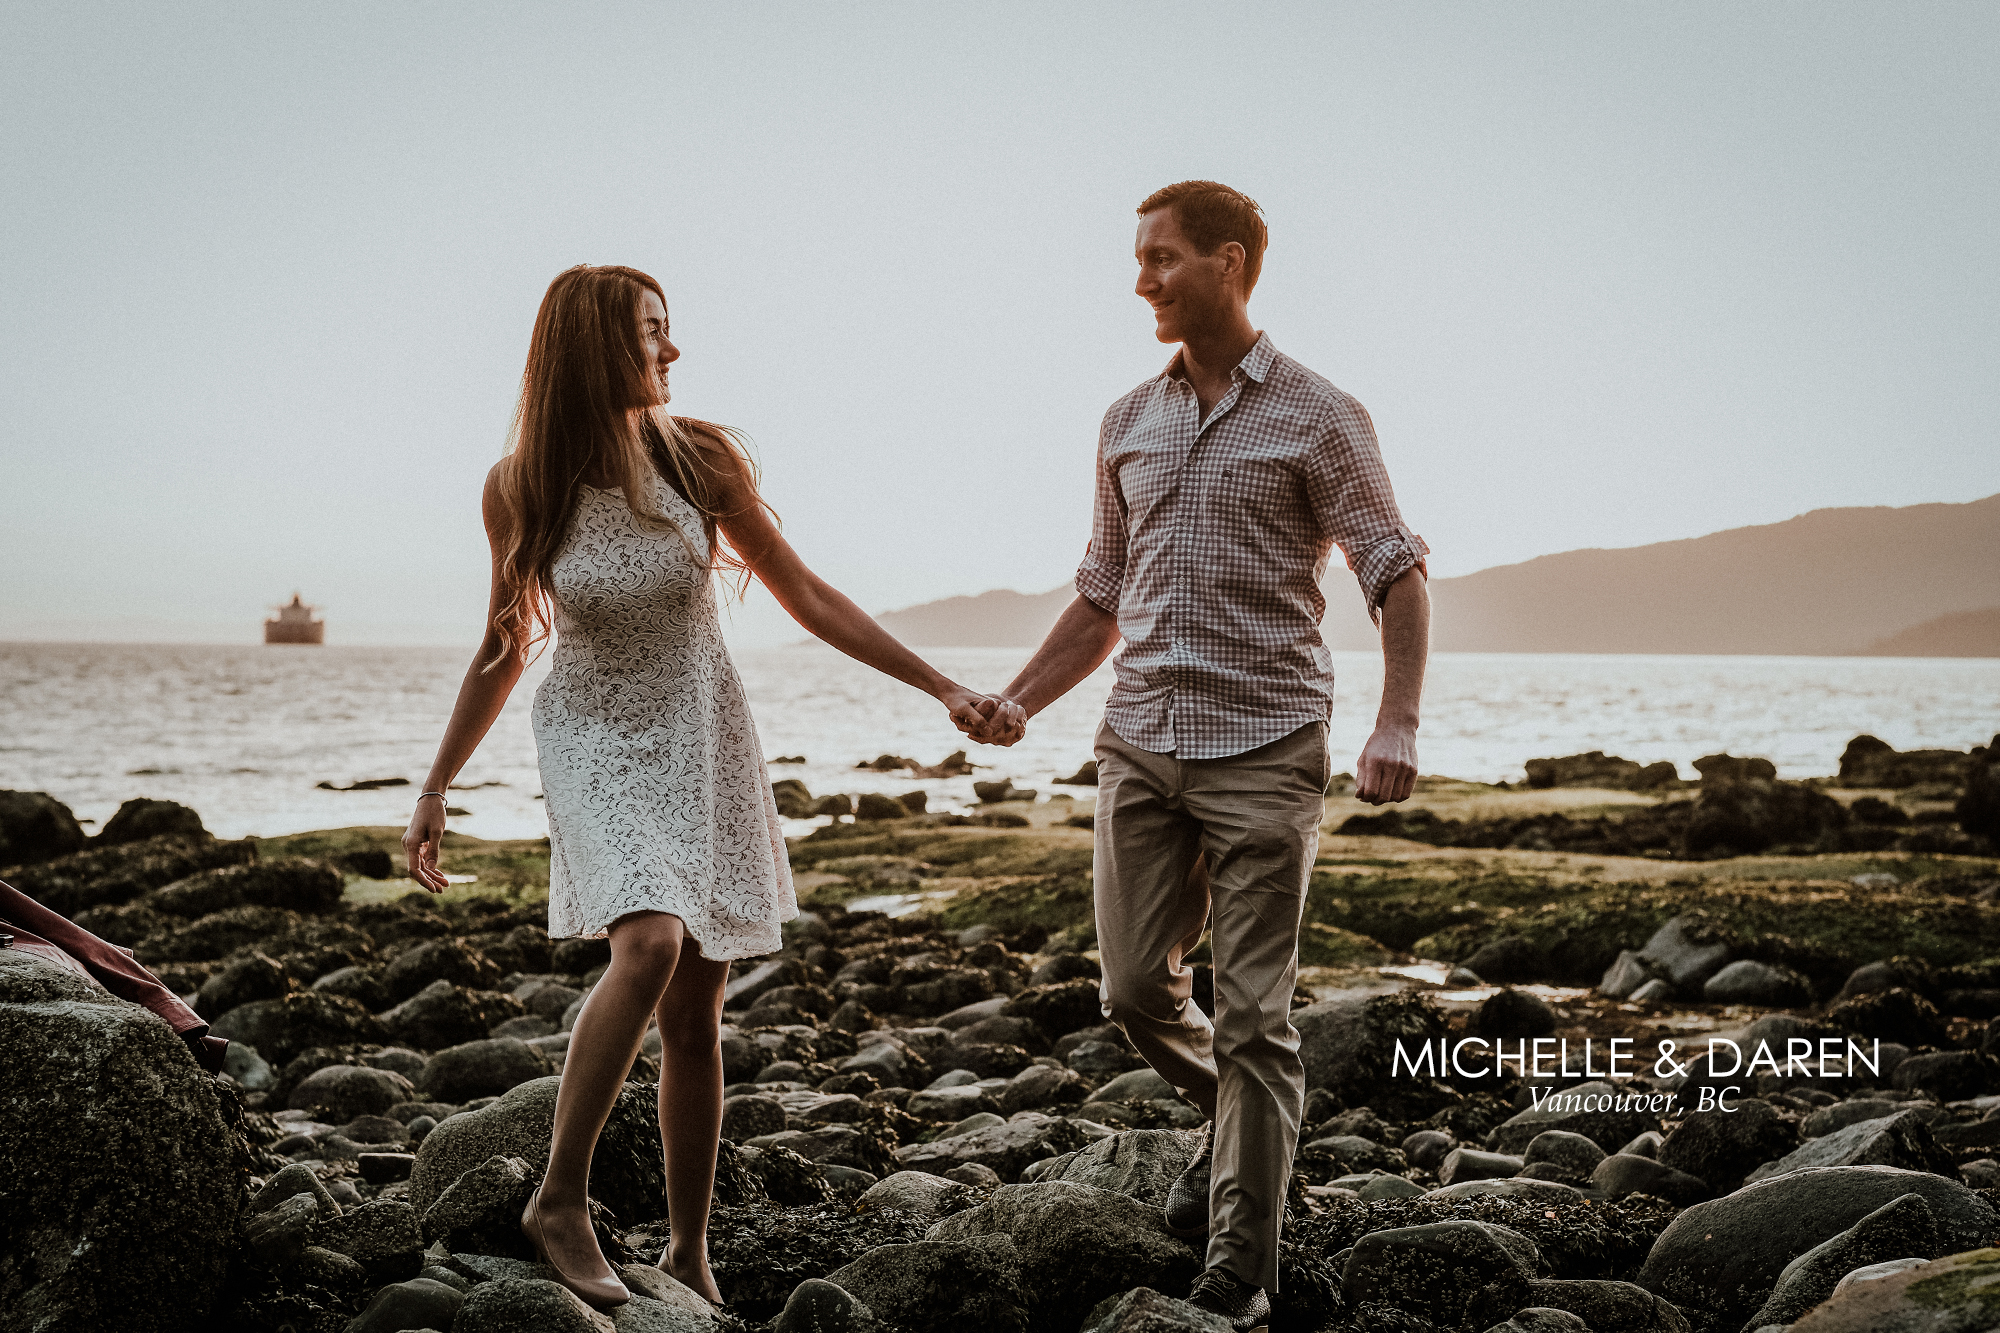 Man and woman walk precariously on rocky beach during engagement session.